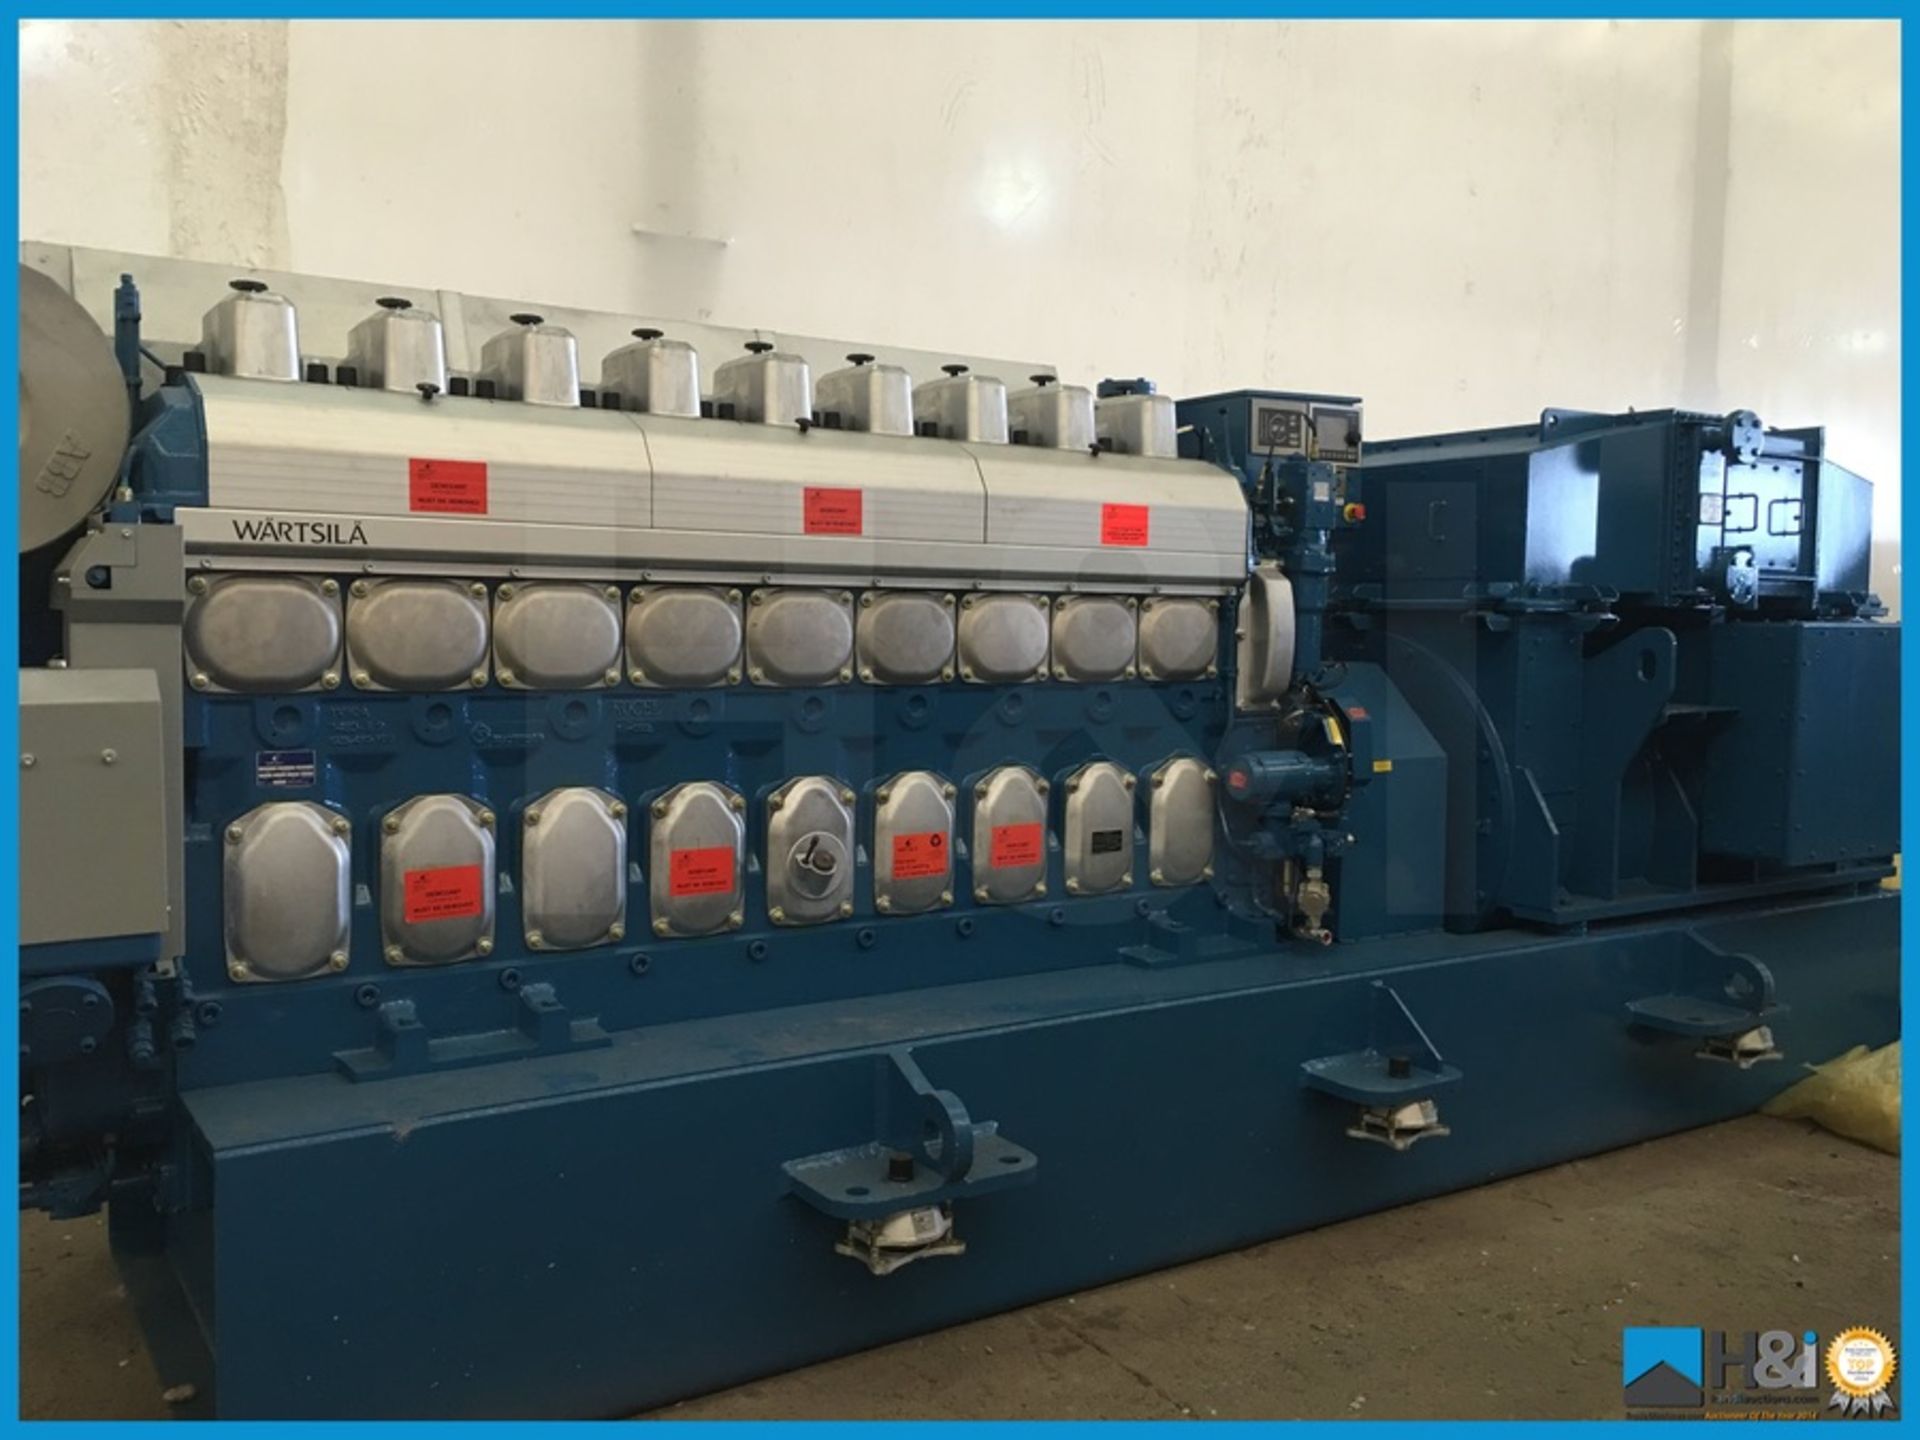 Unused Wartsila 9L20 high capacity diesel generator manufactured in 2013 for a large marine